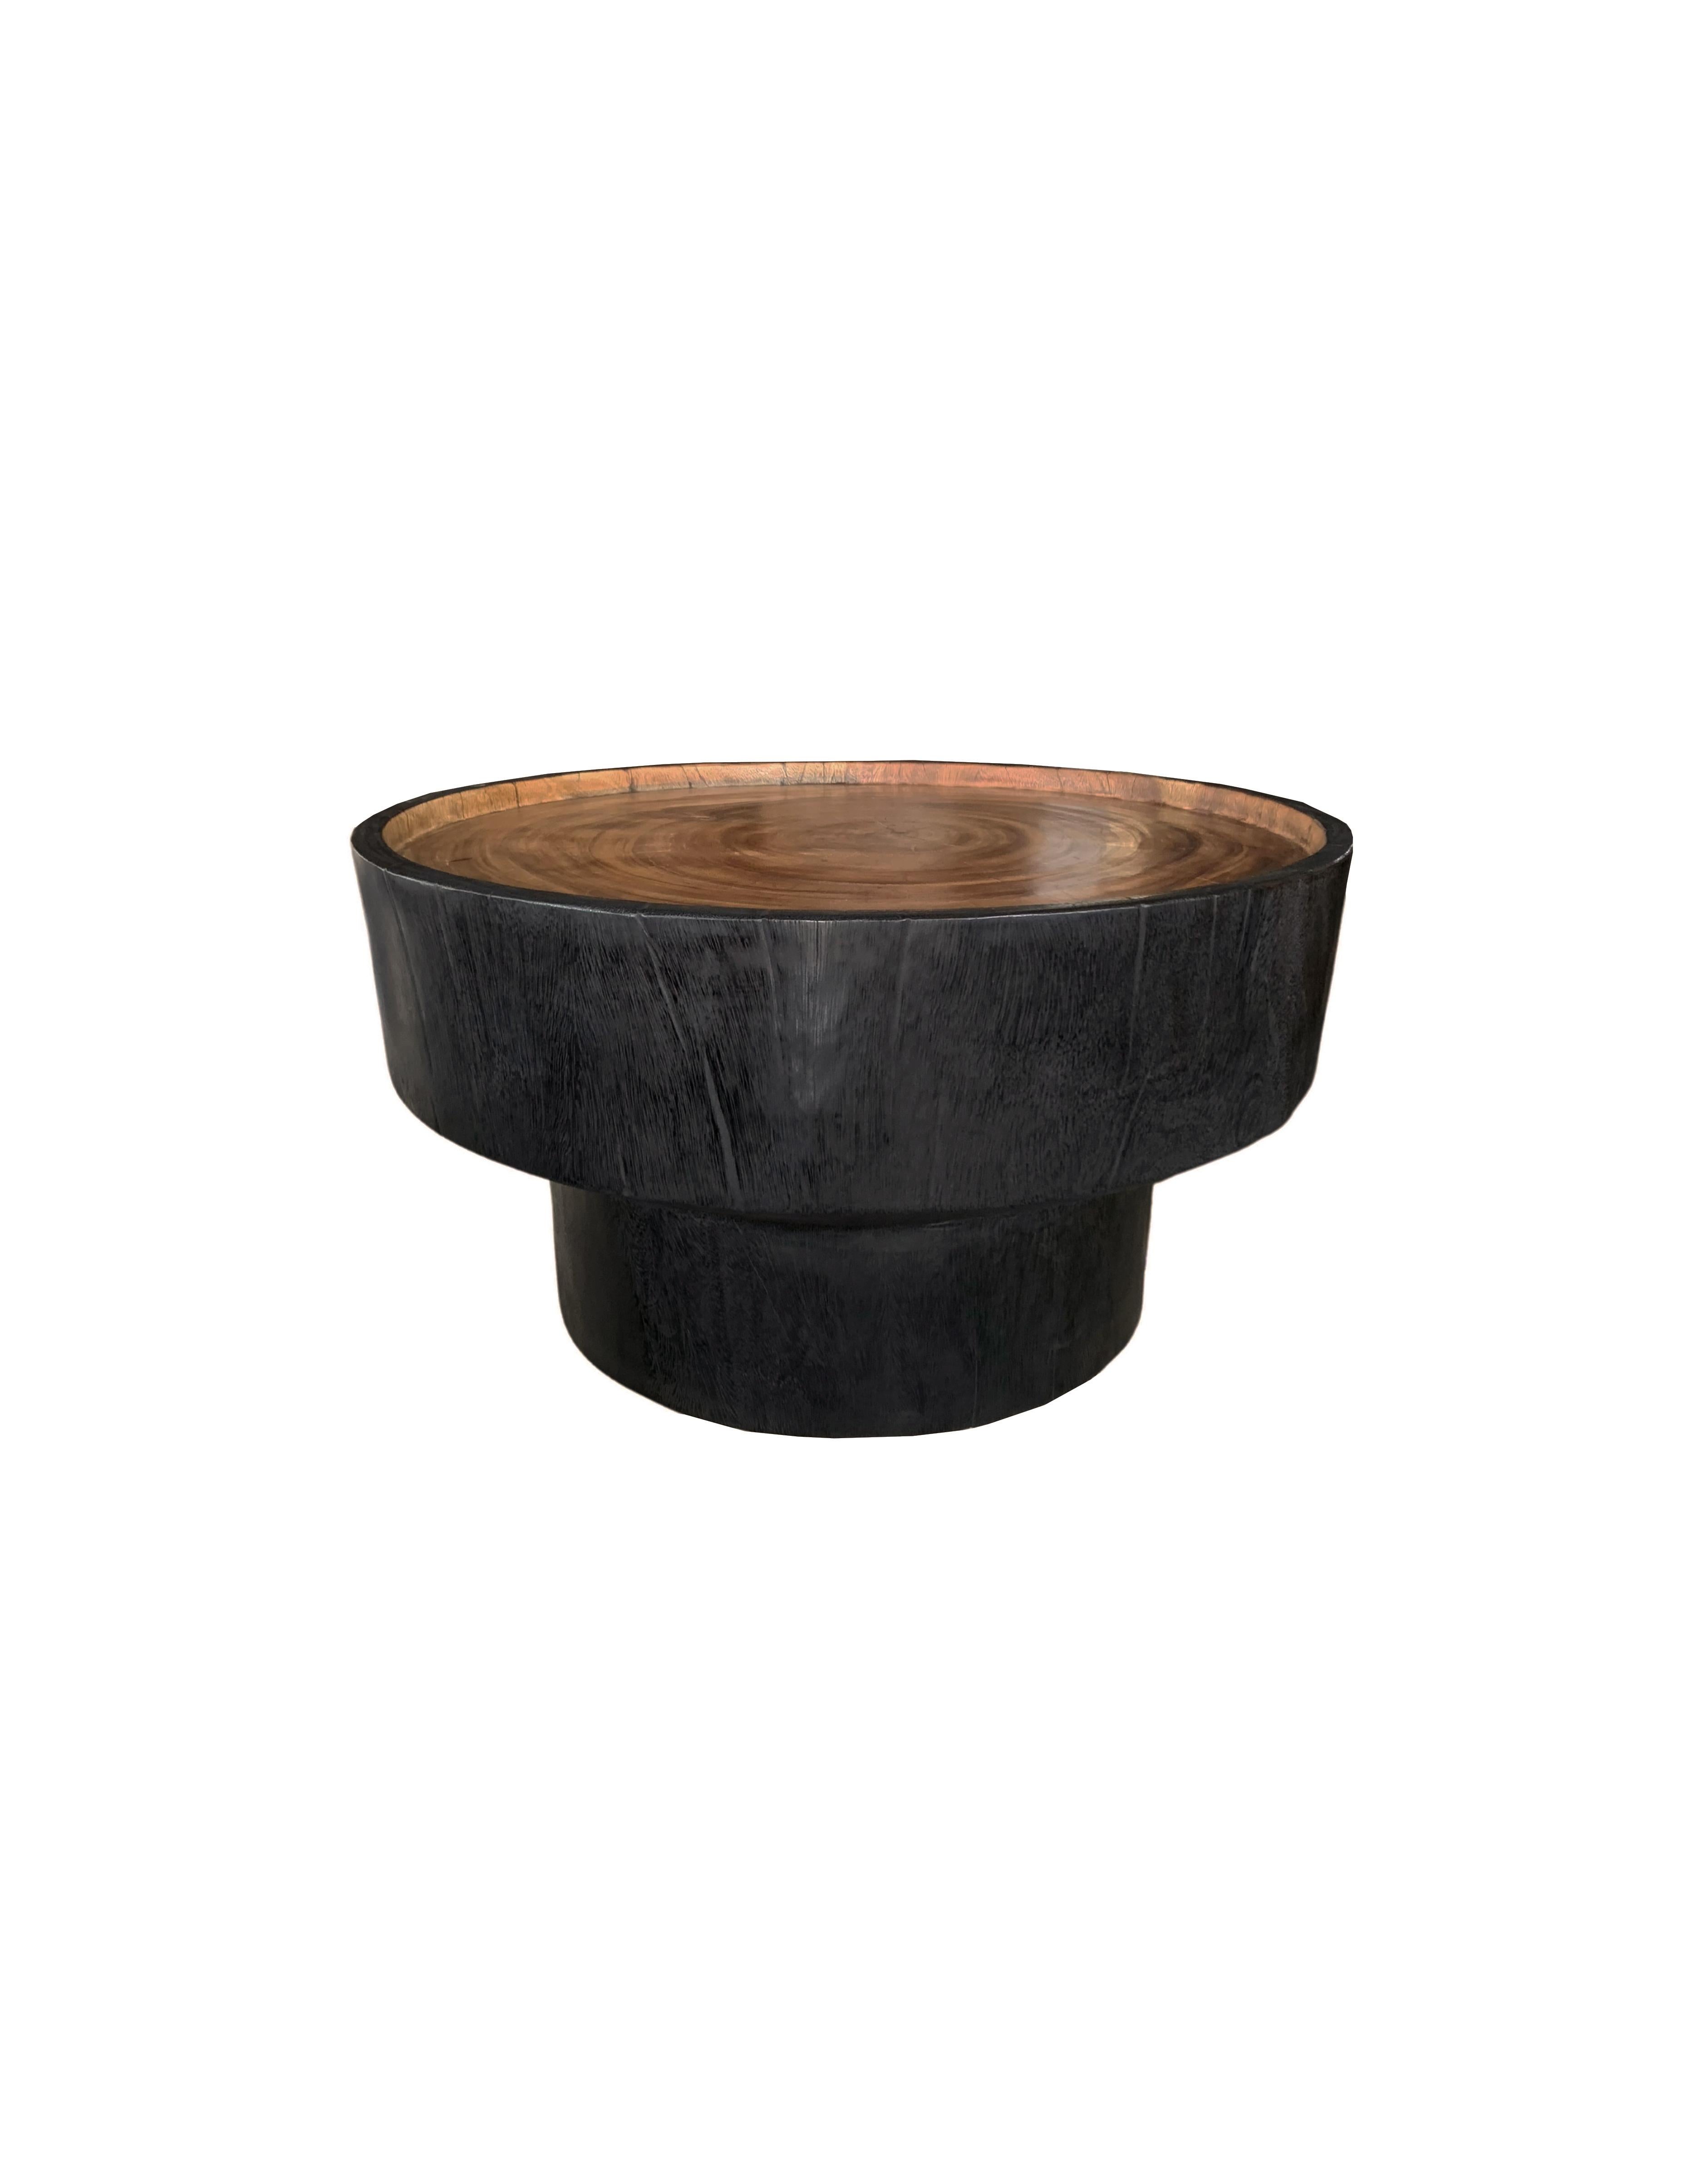 Organic Modern Sculptural Round Table Crafted from Solid Mango Wood For Sale